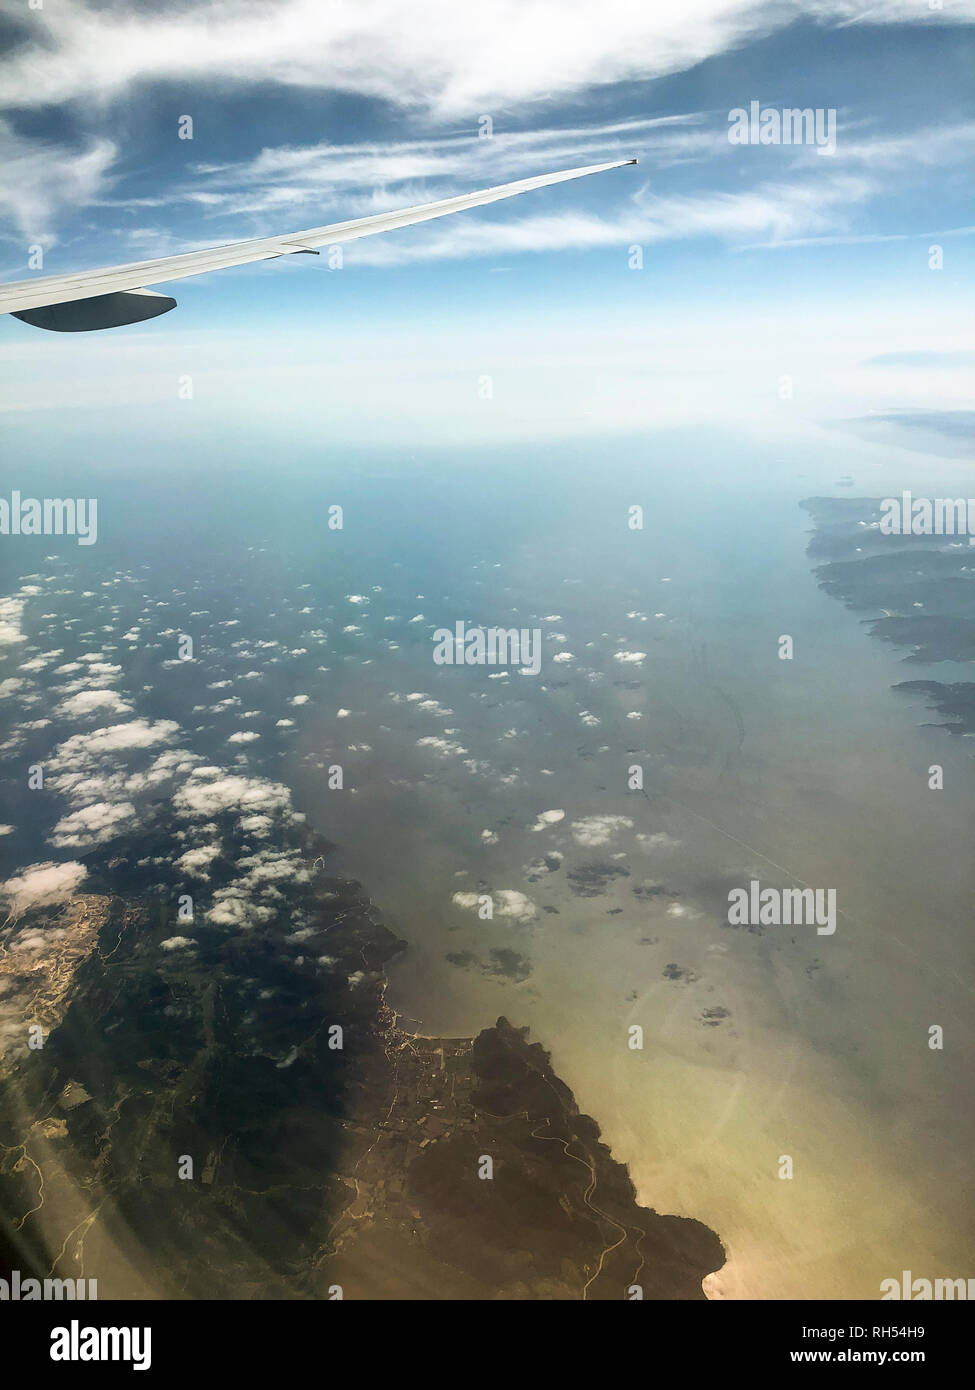 Landscape view from a window of a plane while in flight over Izmir city Turkey. Stock Photo